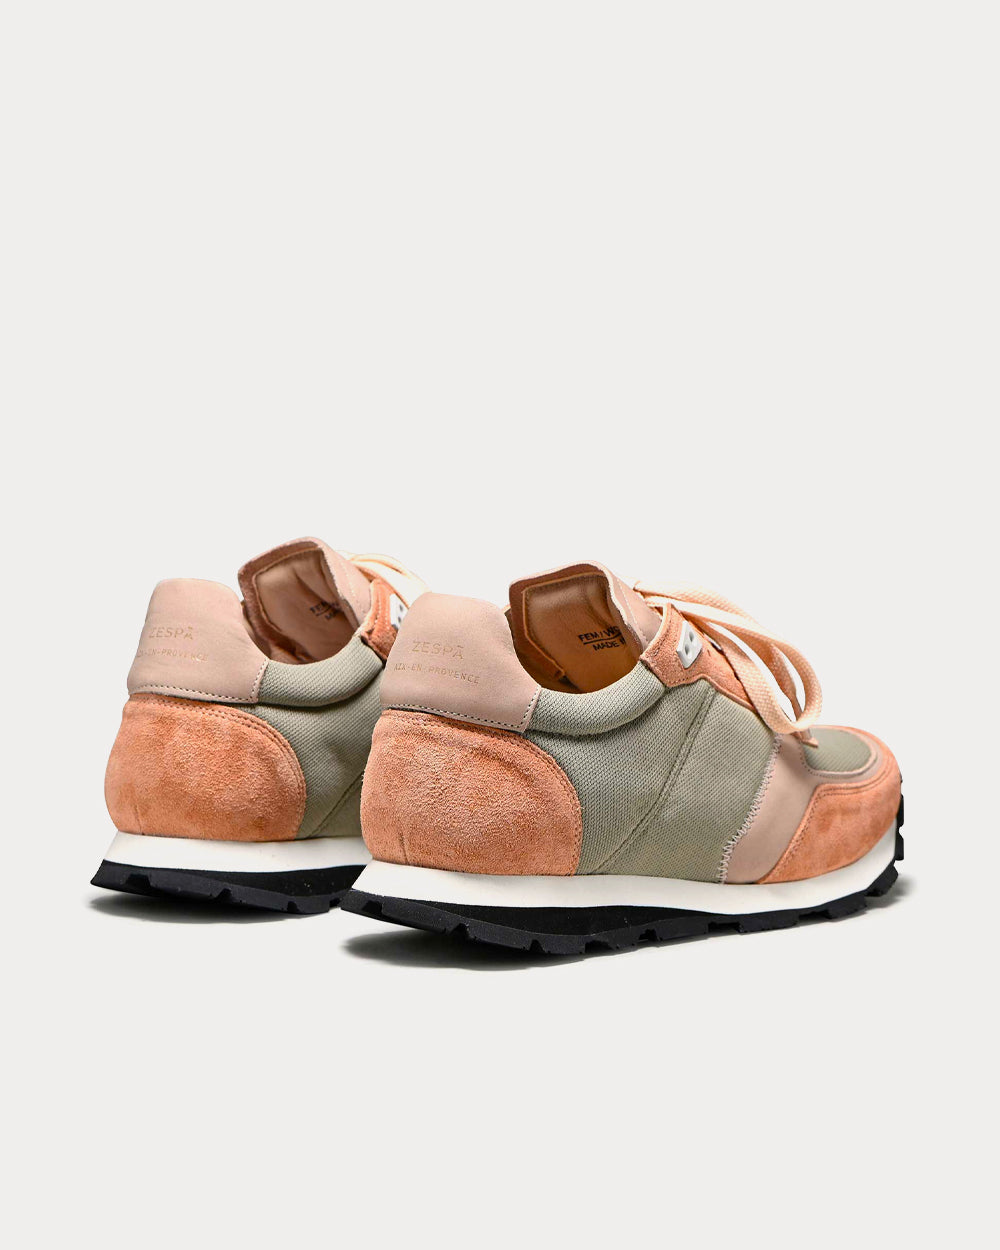 Zespa - ZSP6 Textile HS / Mix Nude / Taupe Low Top Sneakers